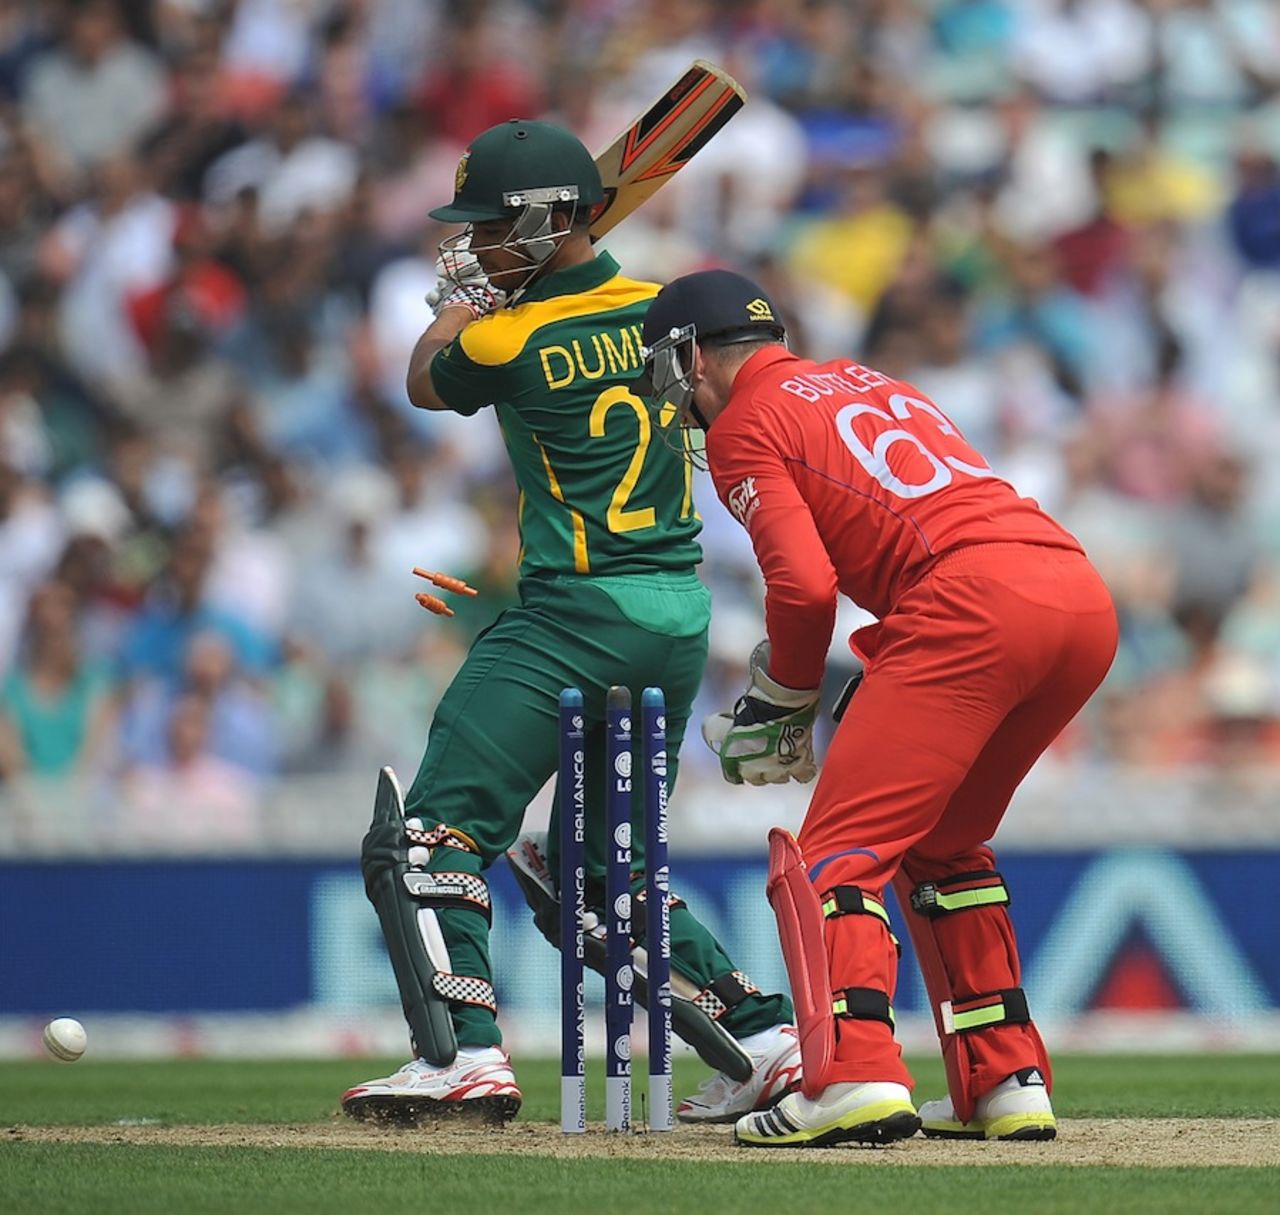 JP Duminy was bowled by James Tredwell, England v South Africa, 1st semi-final, Champions Trophy, The Oval, June 19, 2013